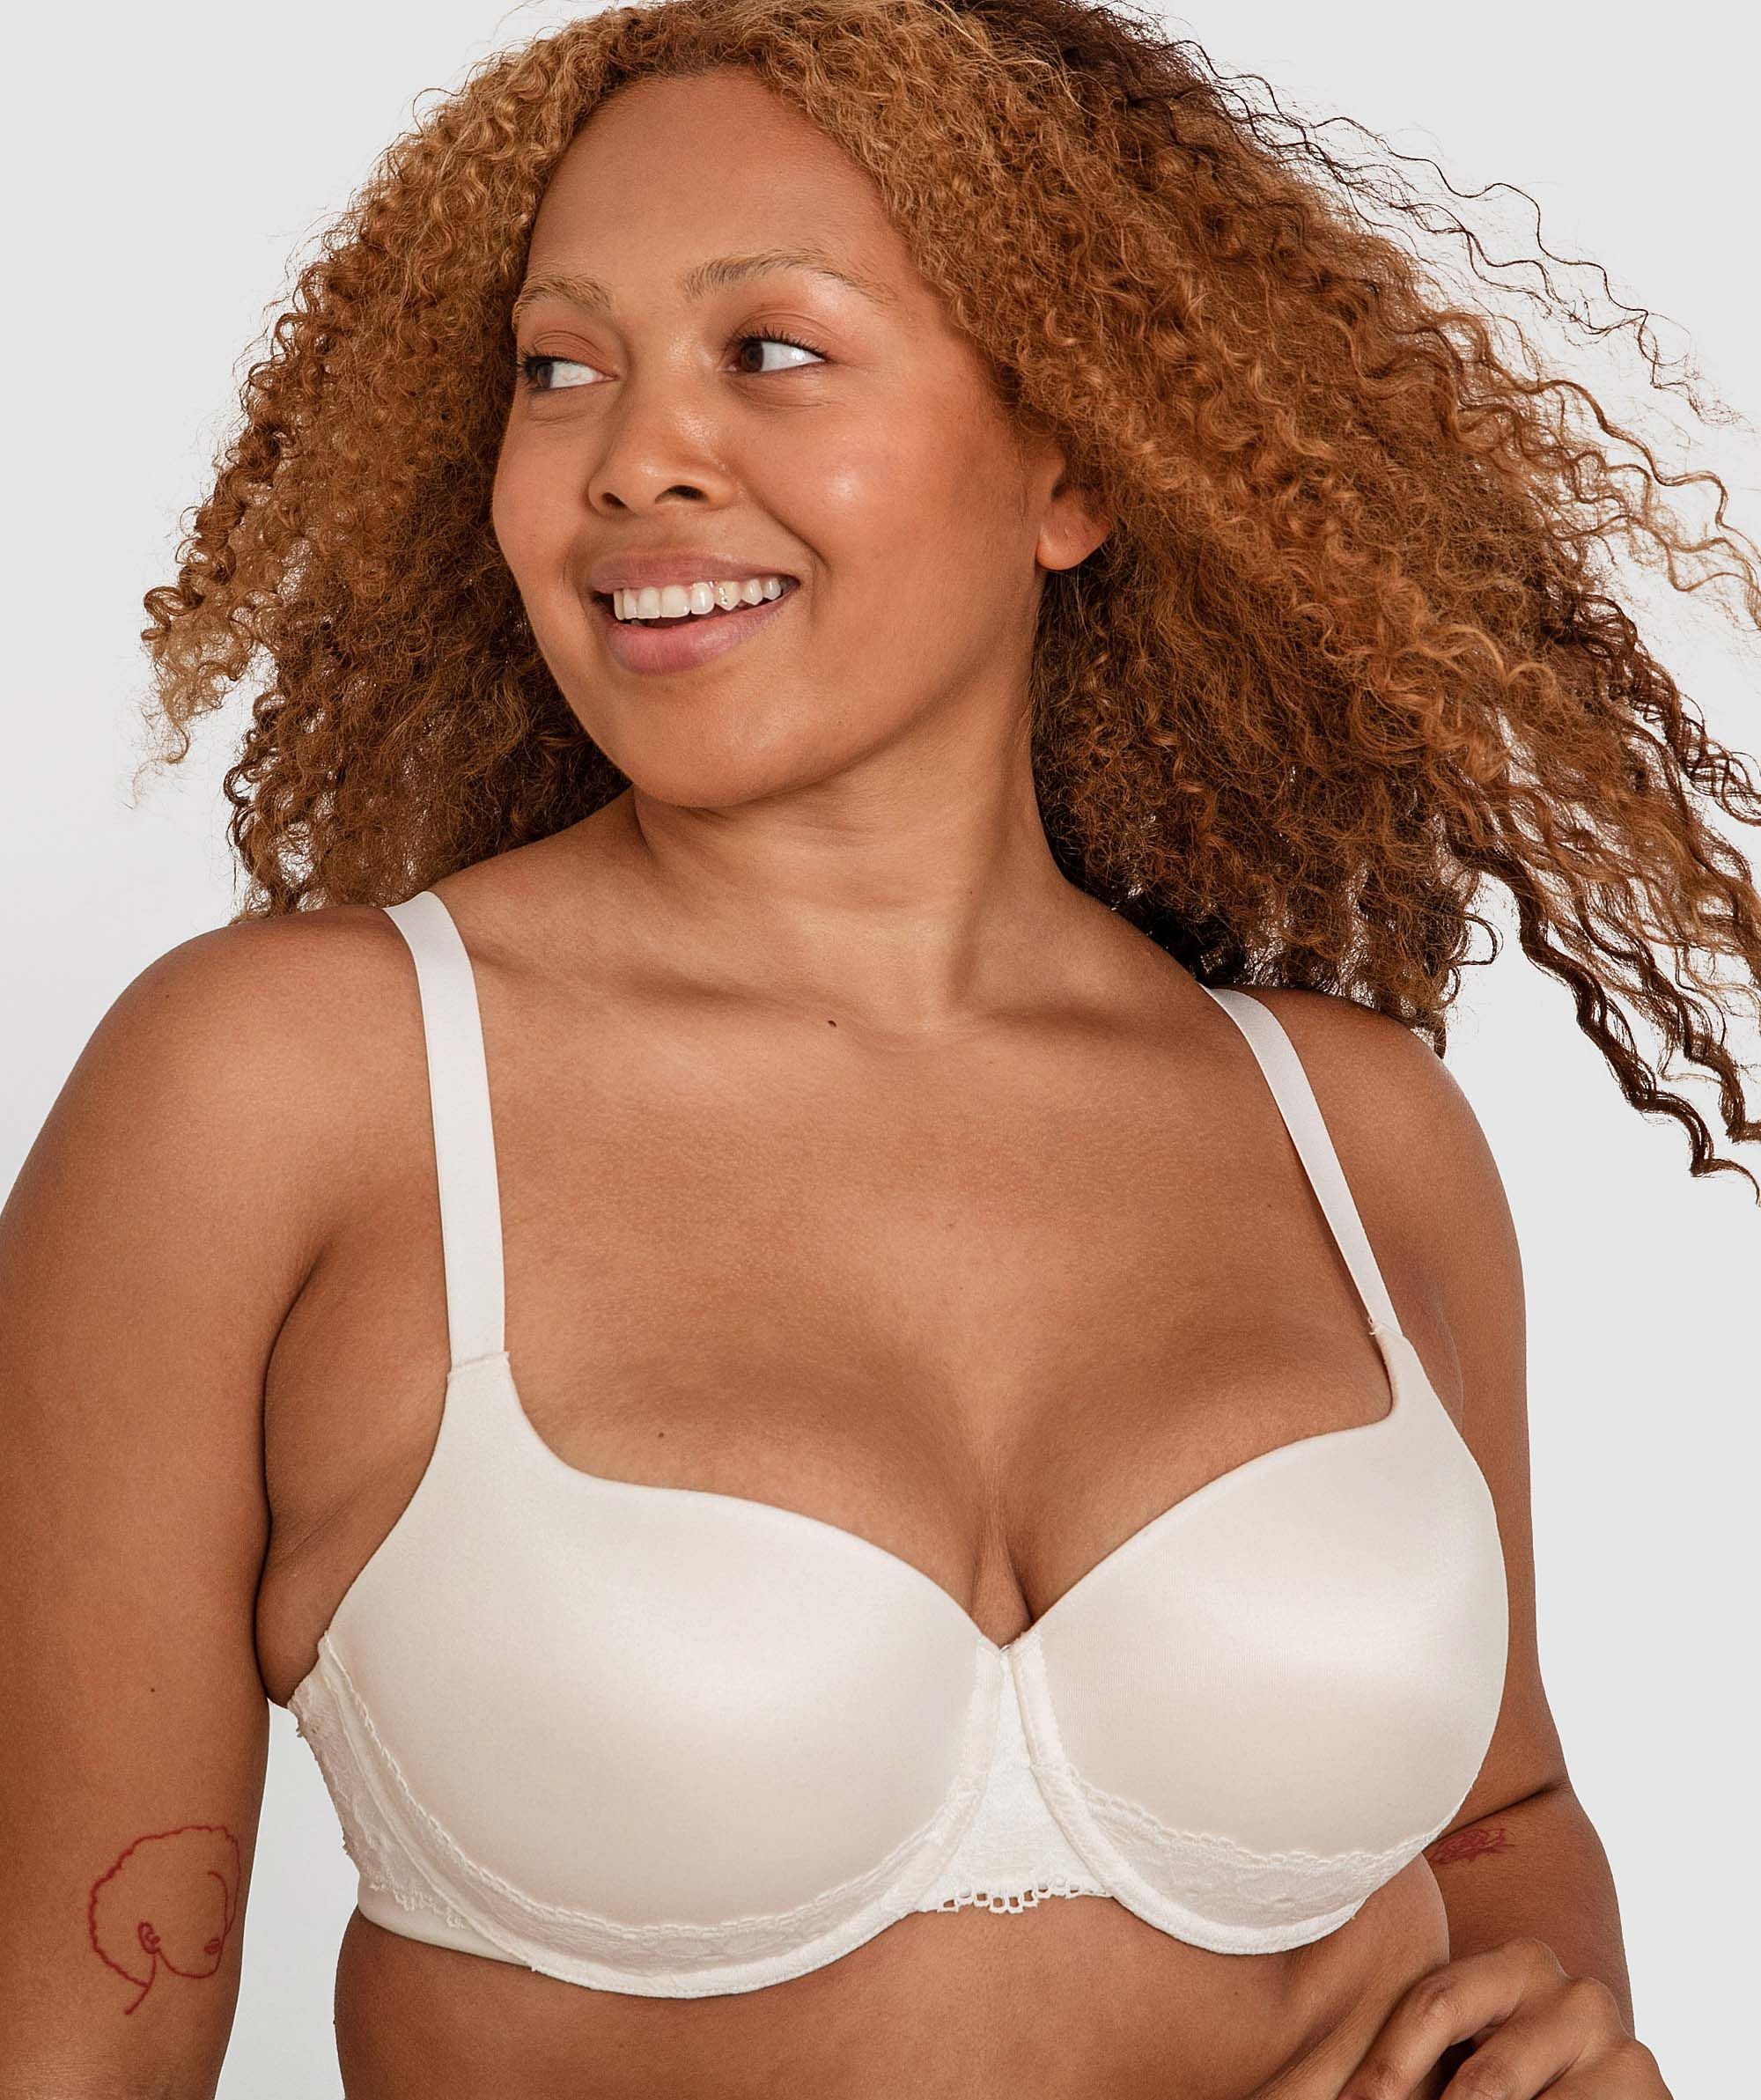 Body Bliss Lace Full Cup Bra - Ivory